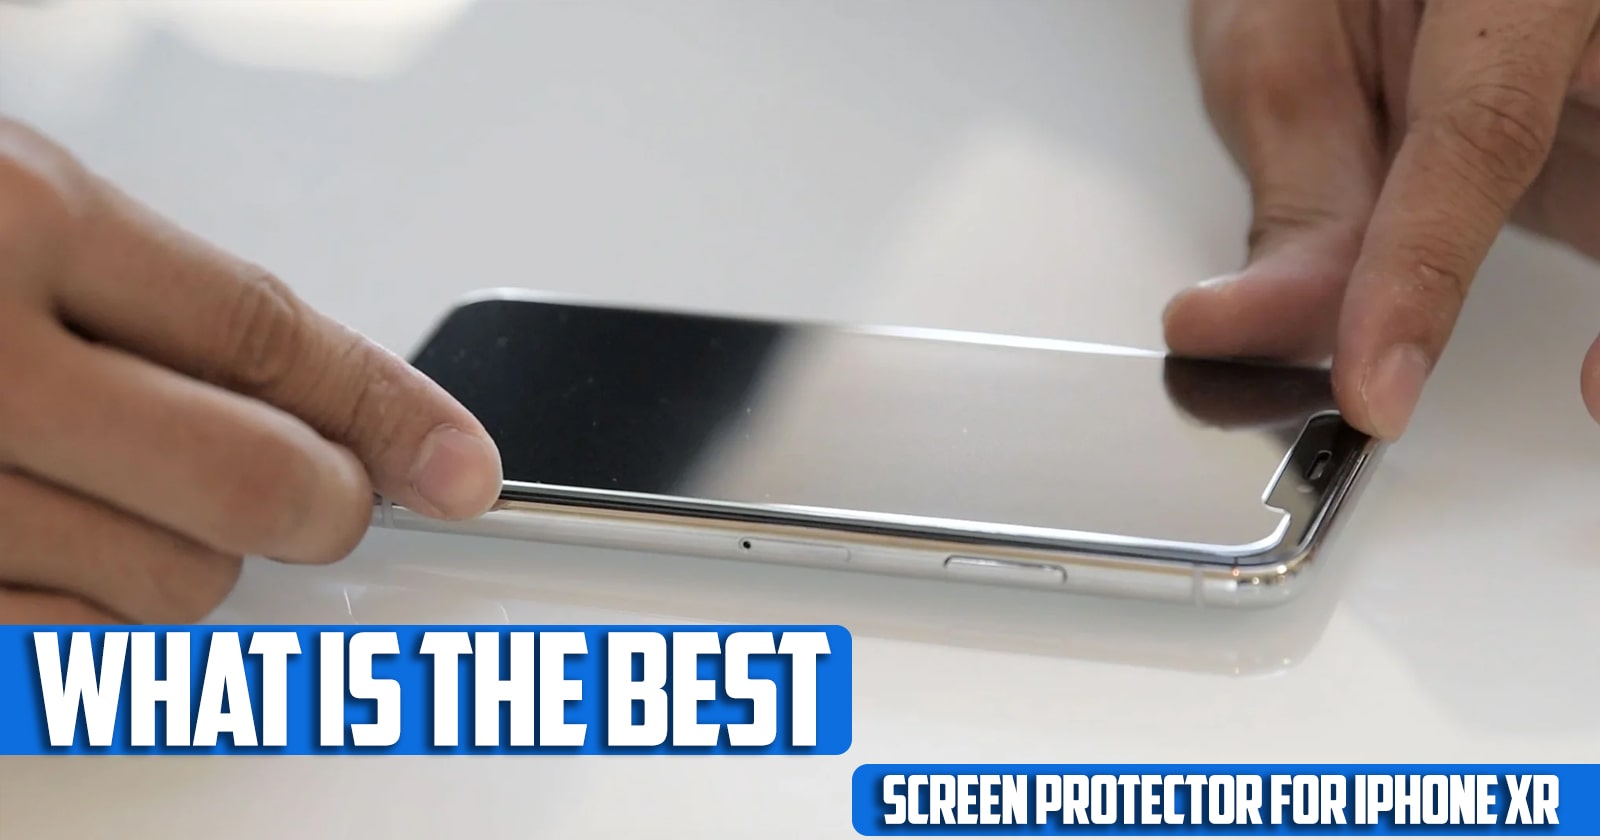 What's the Best Screen Protector for iPhone XR